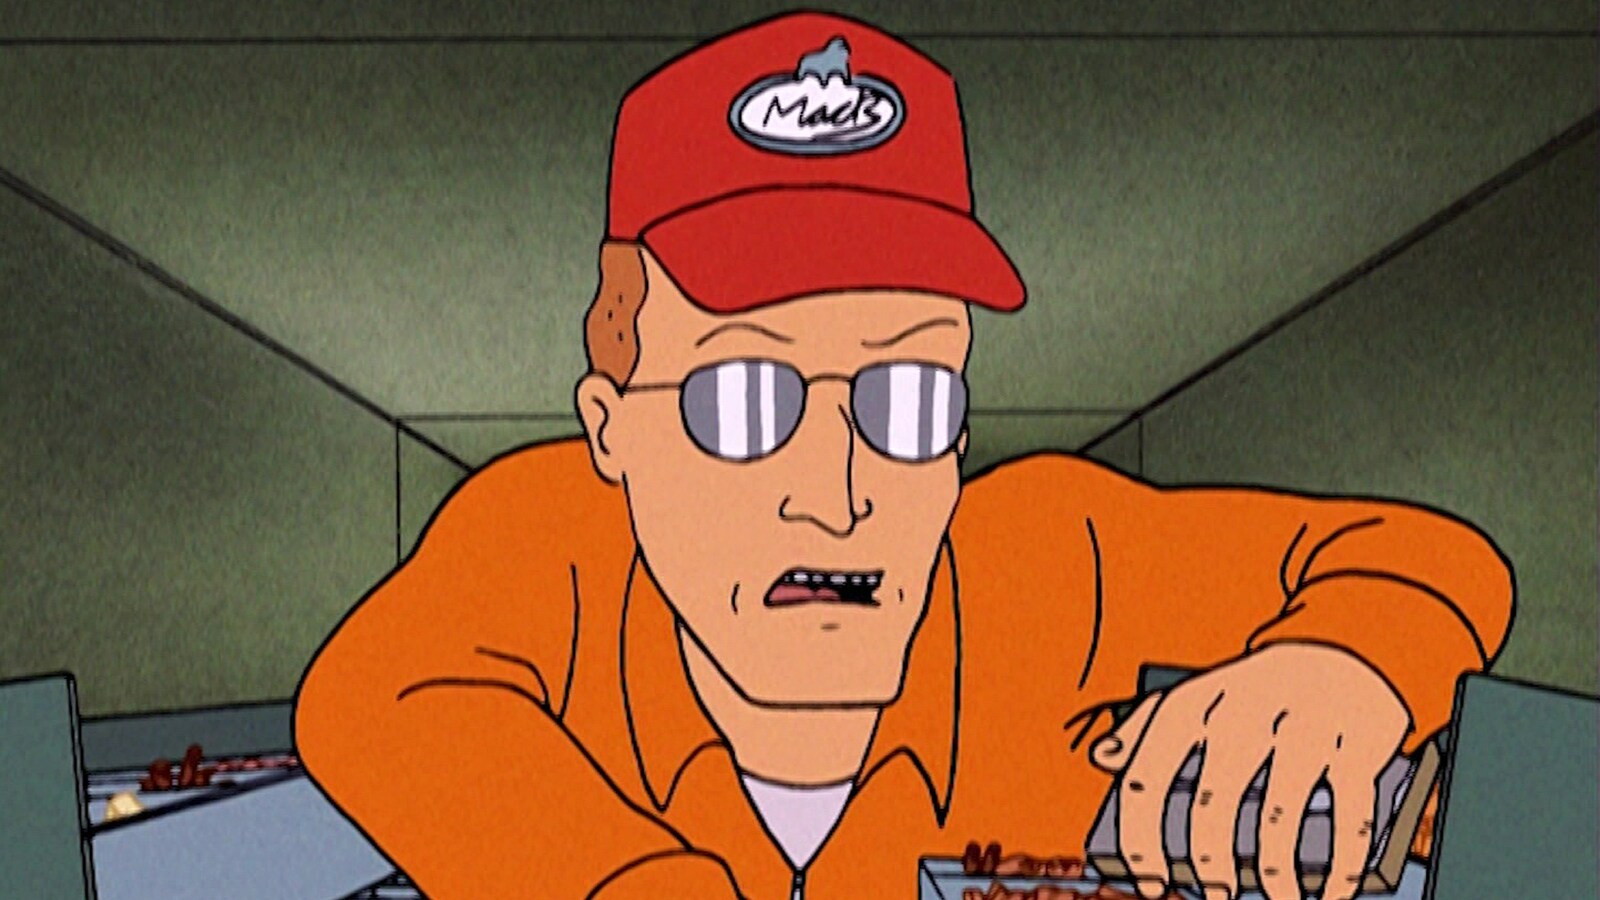 Chuck mangione king of the hill episode